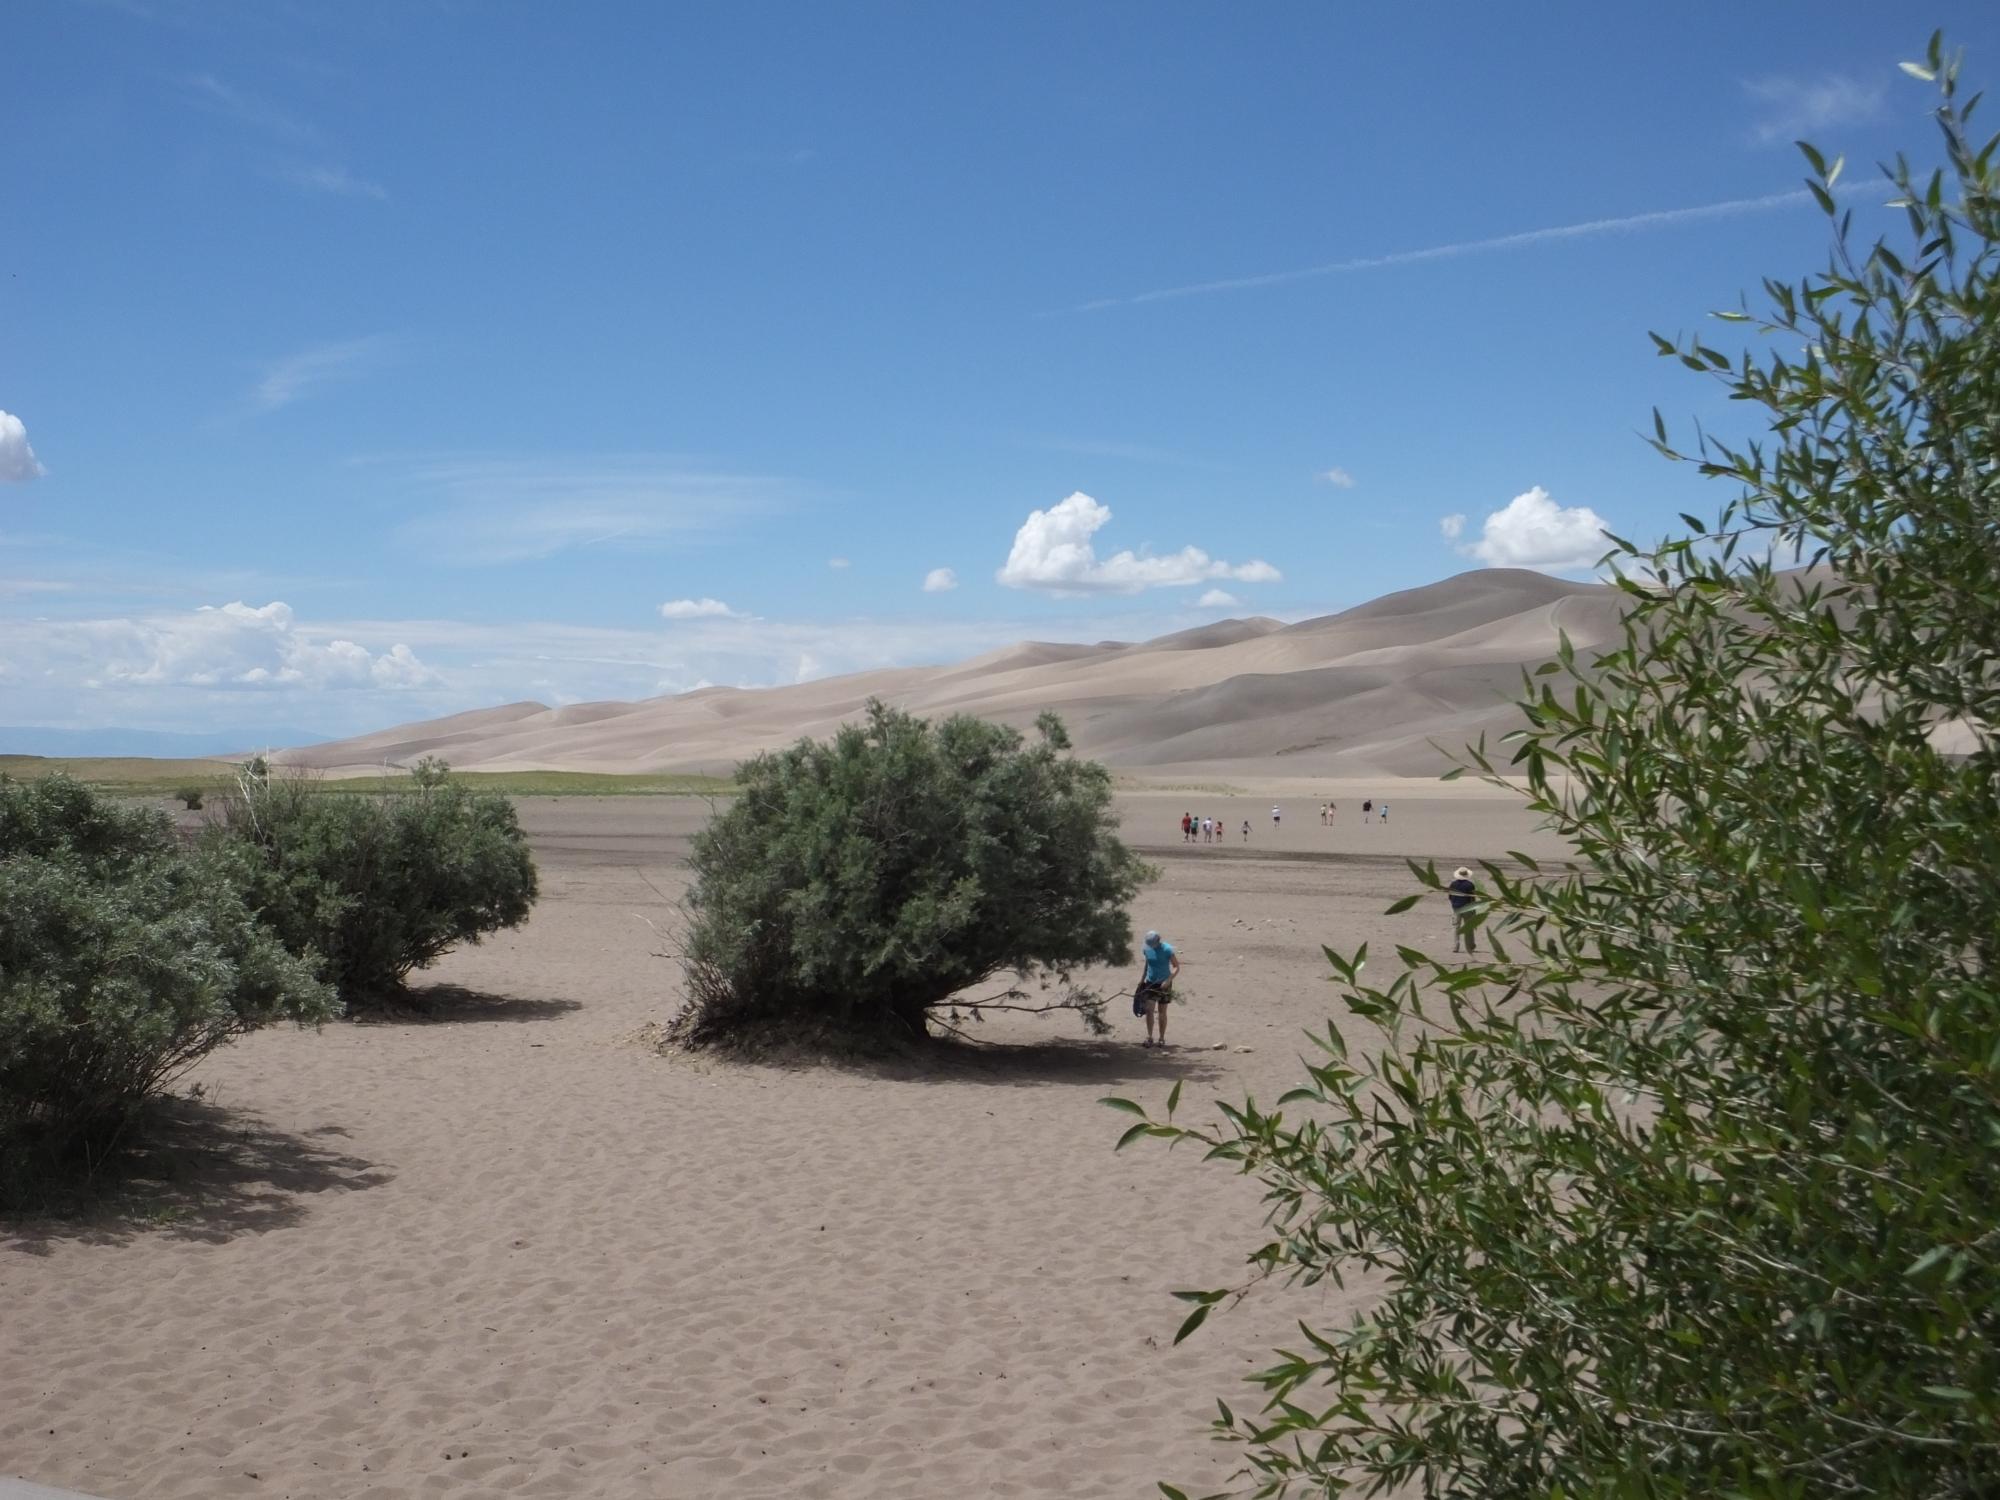 Narrowleaf cottonwood at Great Sand Dunes National Park in Colorado.